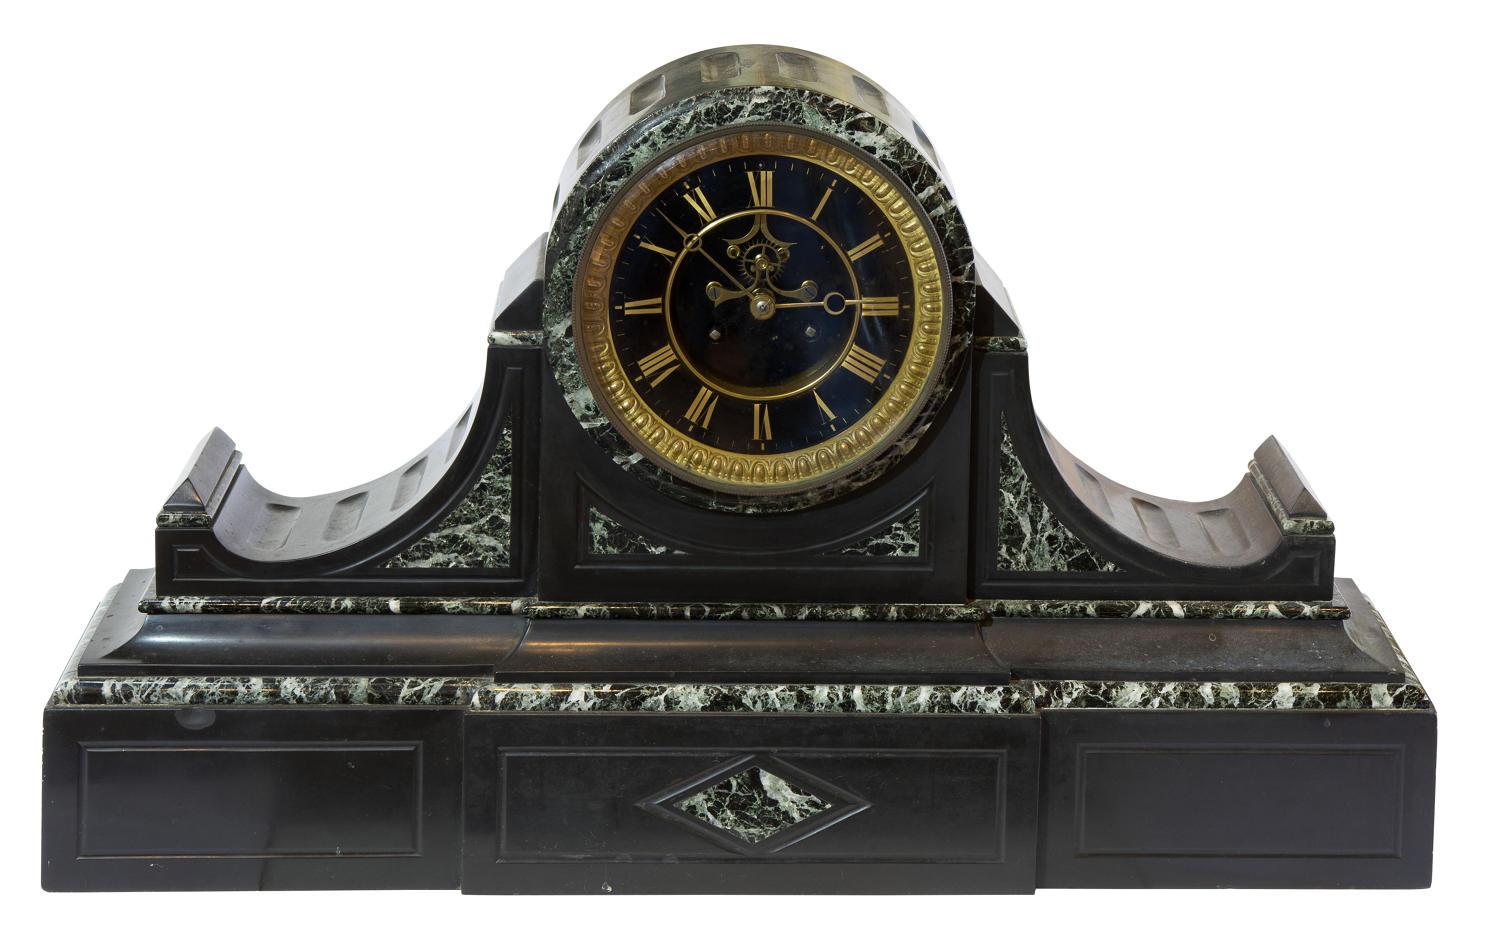 A monumental French mantel (fireplace) clock of month duration with open escapement in a polished slate and variegated green marble case of drumhead form.,

circa 1870.